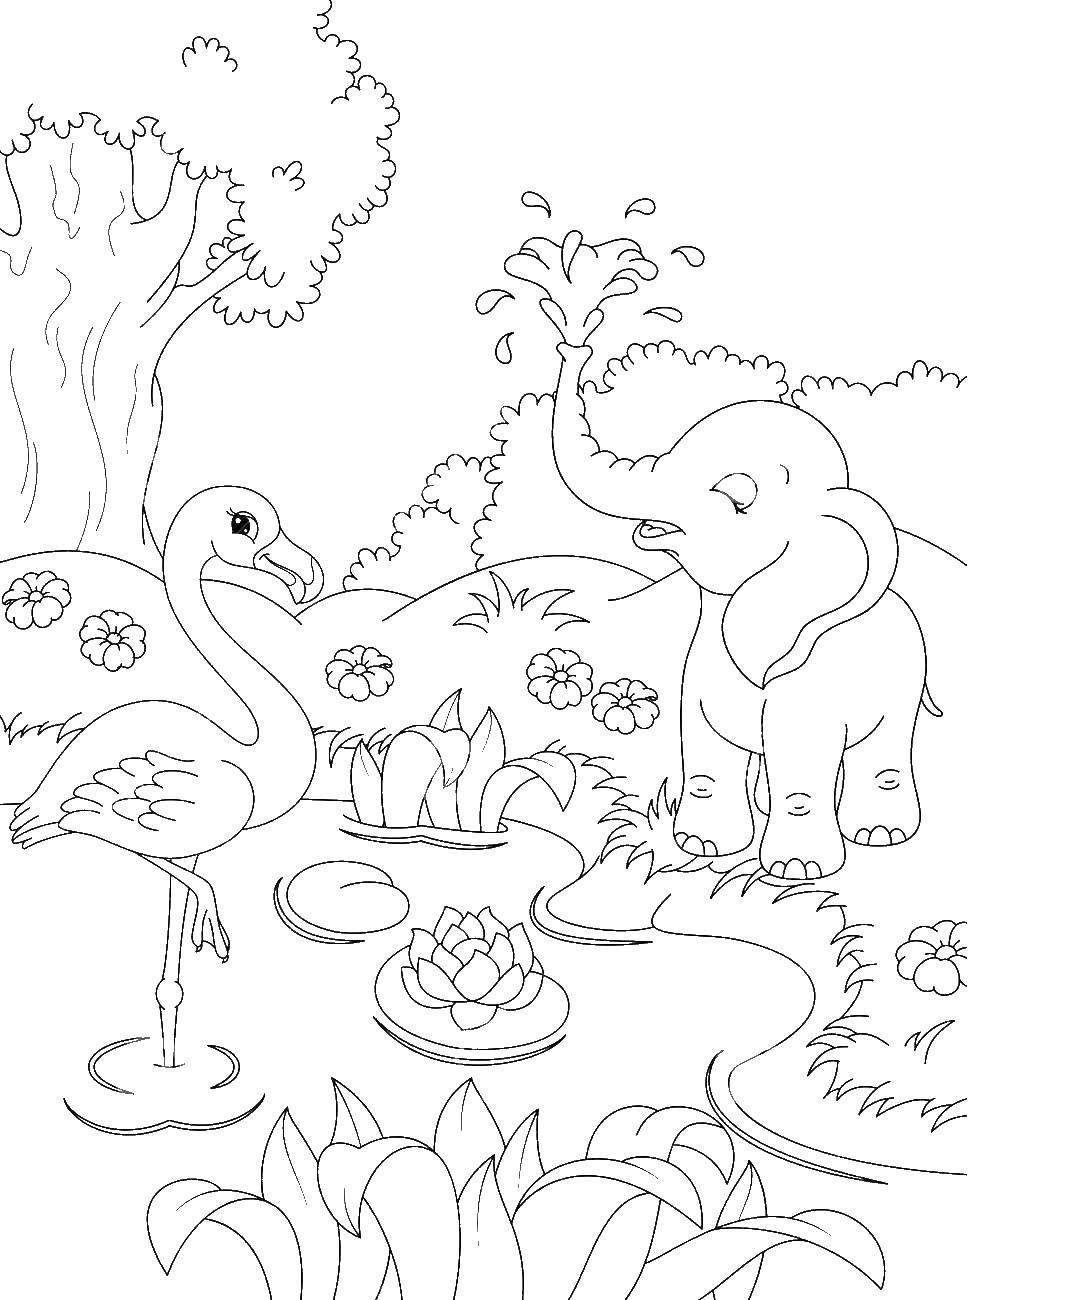 Coloring Flamingo and elephant in a swamp with water lilies. Category Nature. Tags:  Flamingo, elephant, swamp, water lilies.